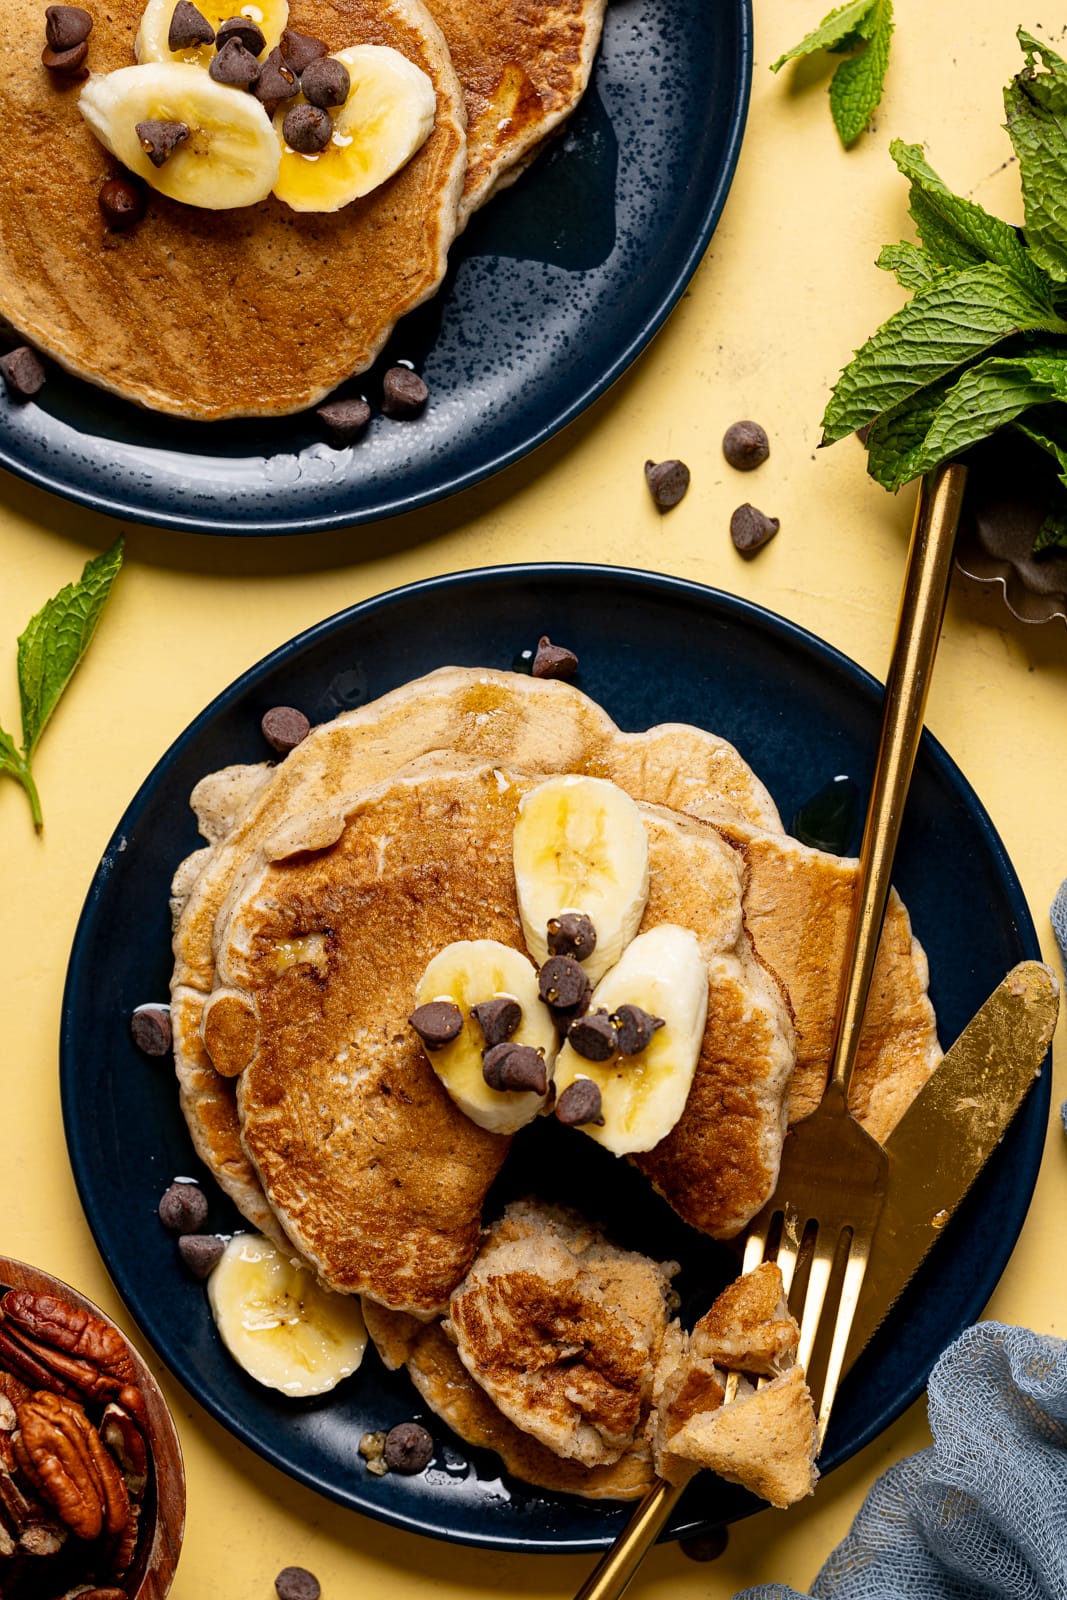 Pancakes on two plates with sliced bananas, chocolate chips, and sliced with a knife and fork.